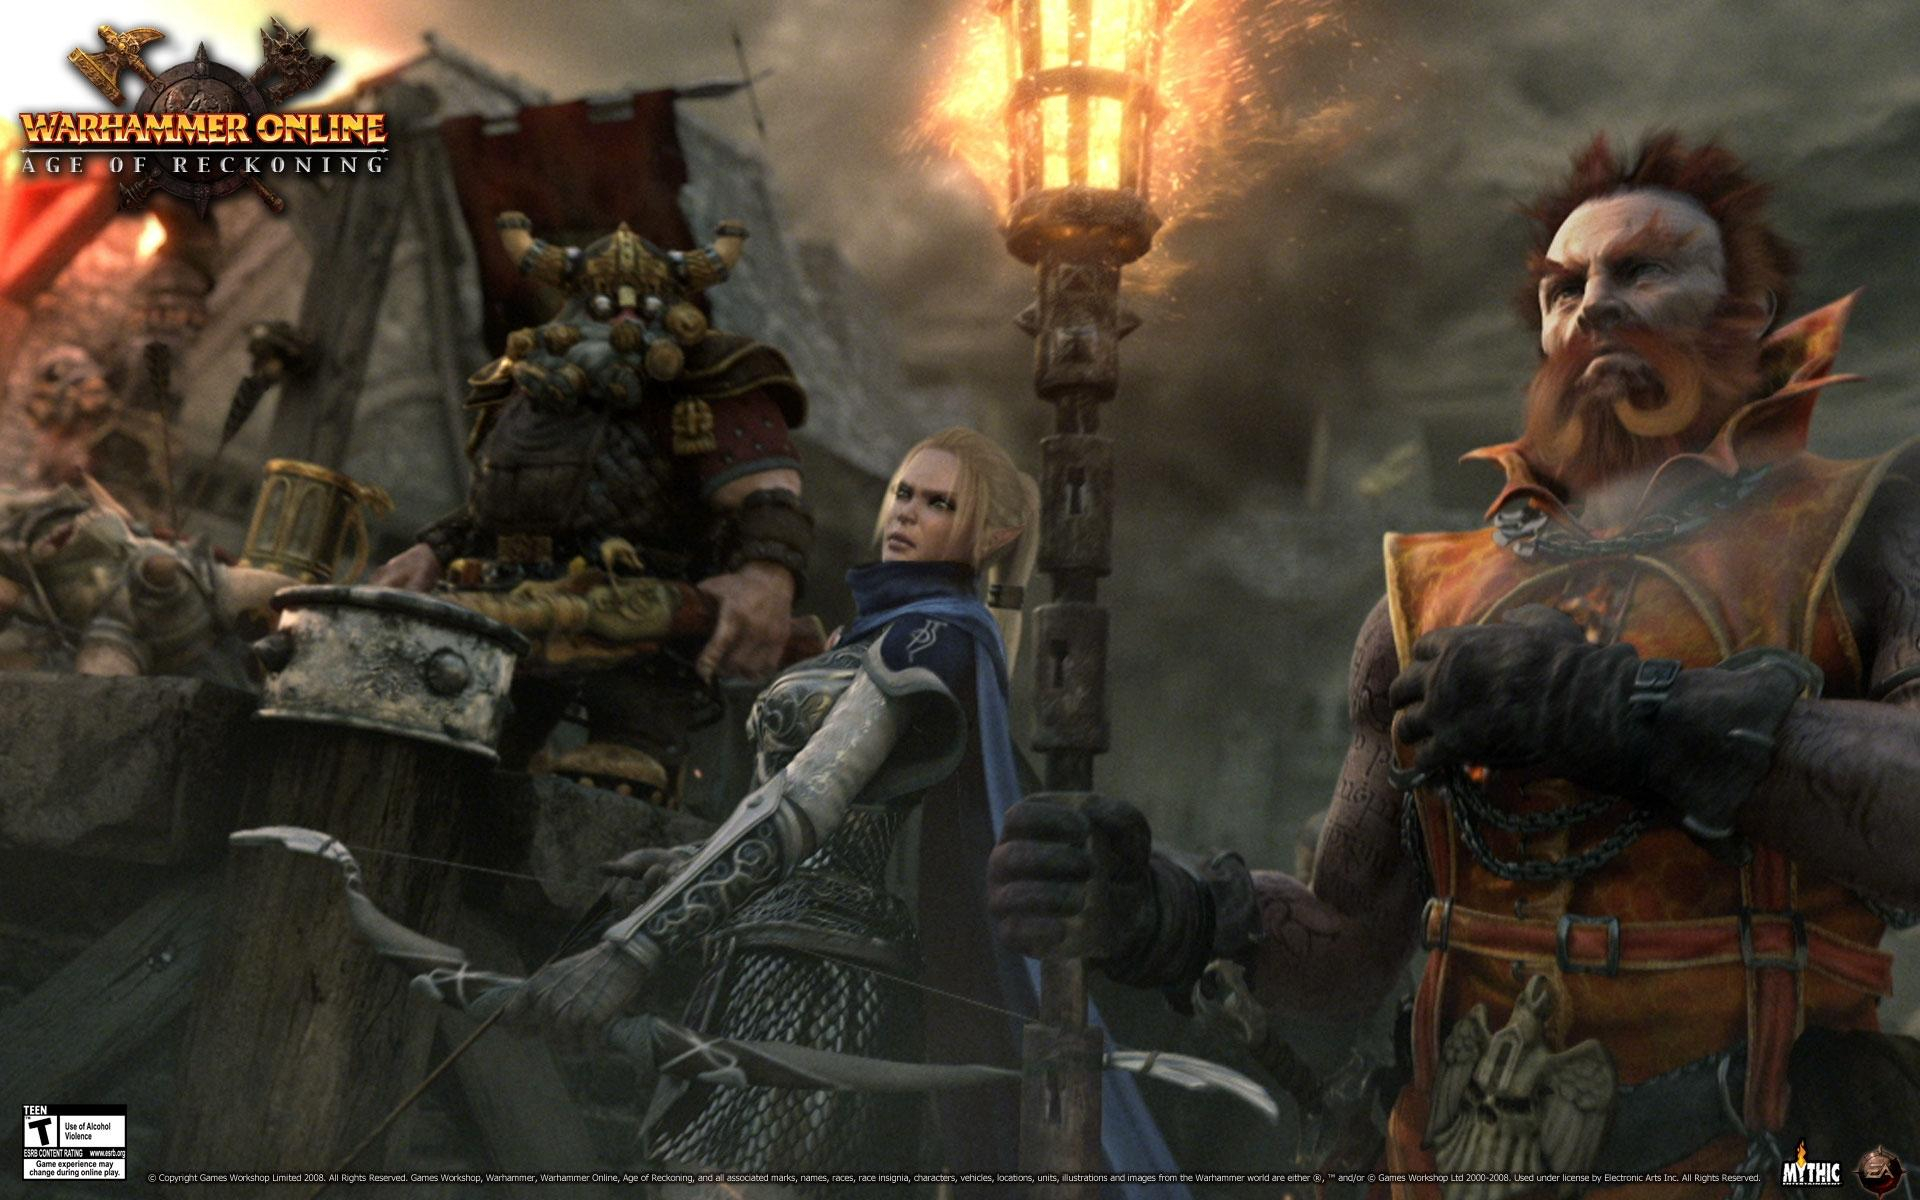 1920x1200 Images Warhammer Online: Age of Reckoning vdeo game